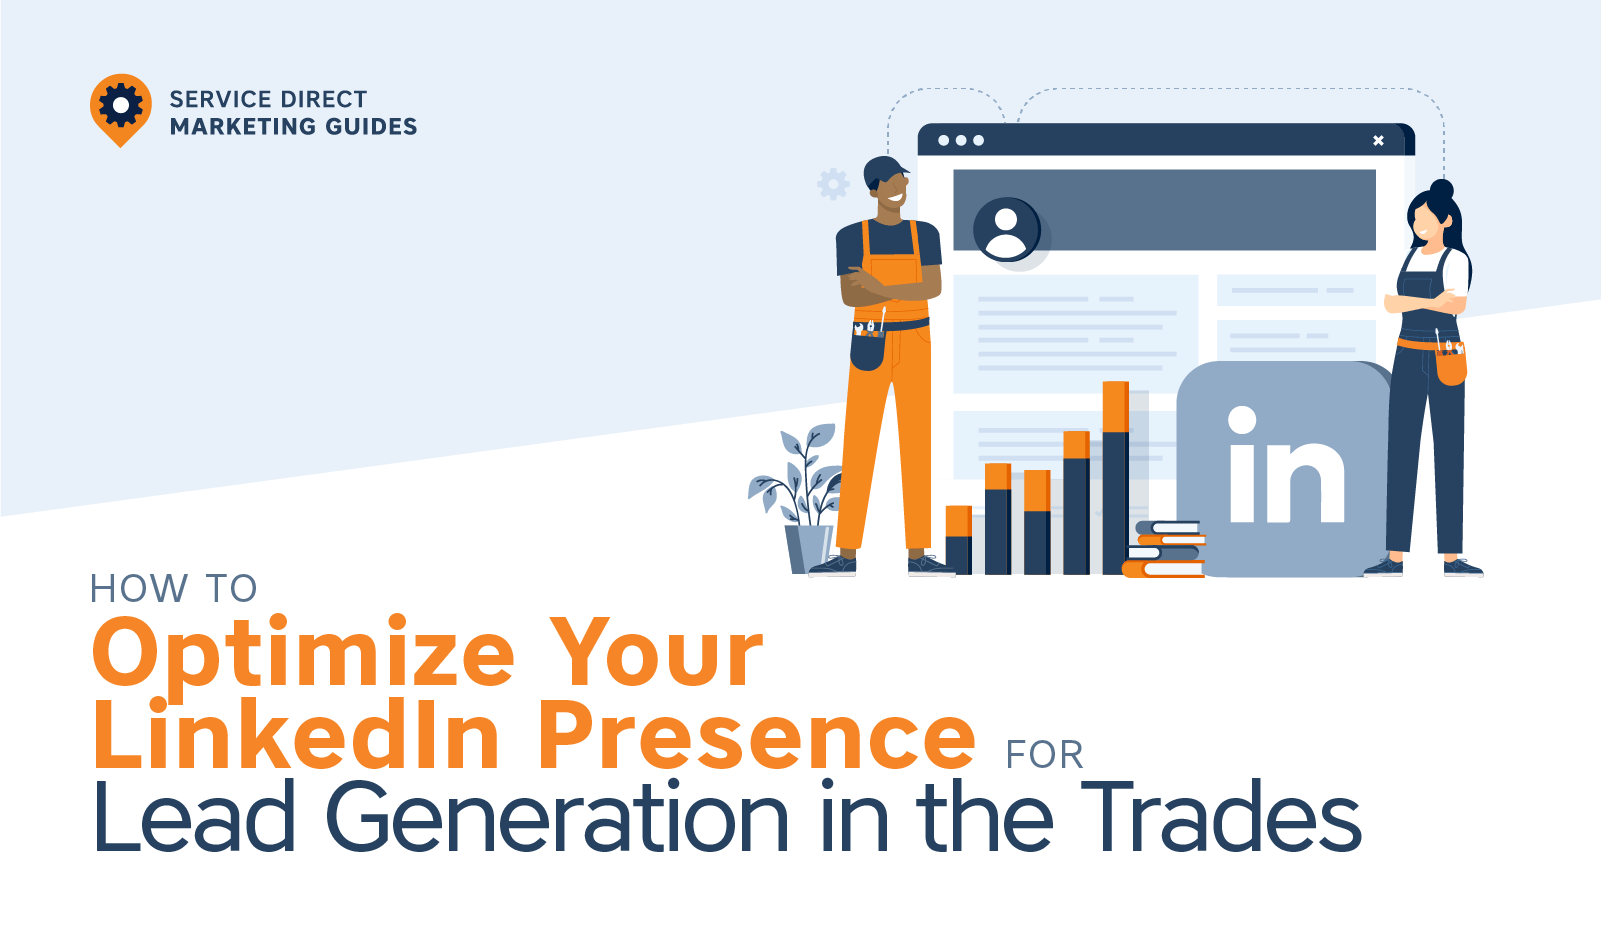 How to Optimize Your LinkedIn Presence for Lead Generation in the Trades